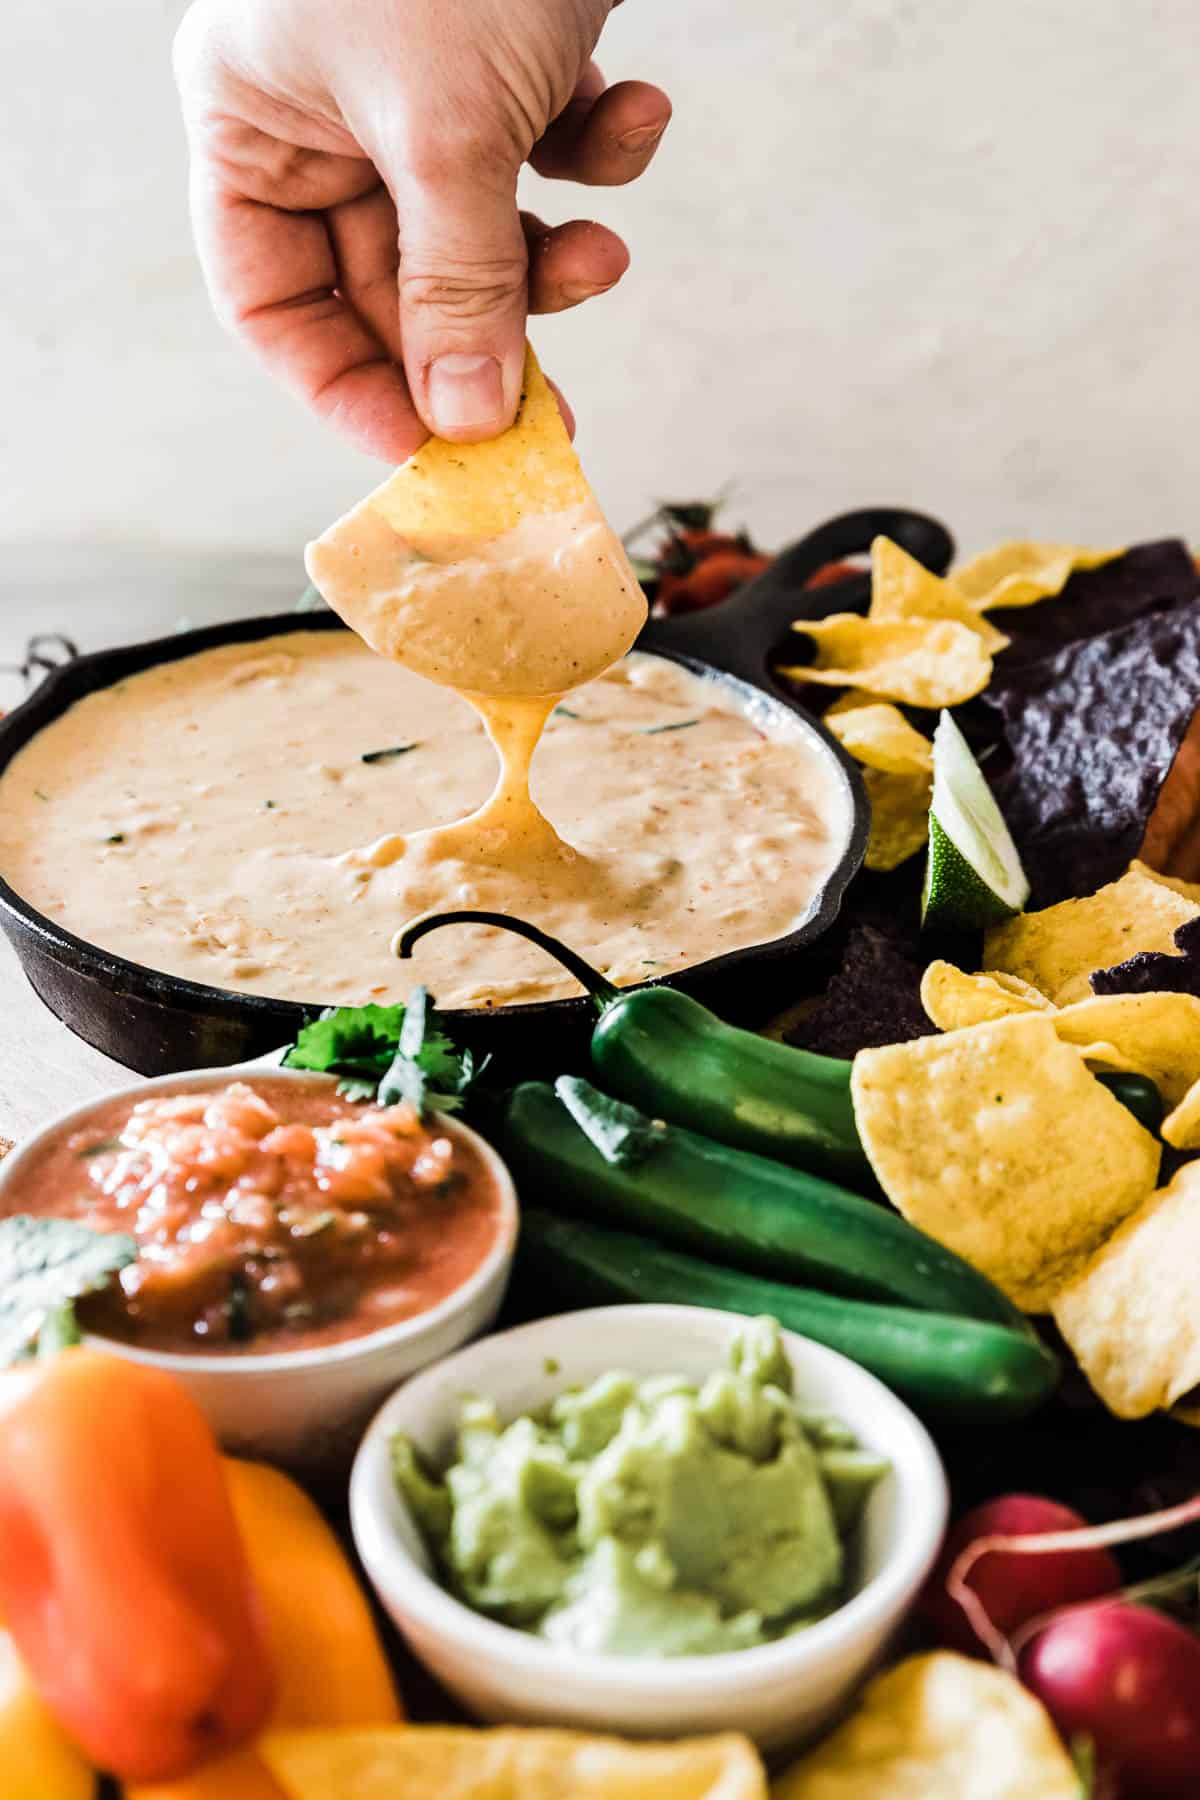 The best queso recipe in a cast iron skillet. The dip is being dunked into with a tortilla chip.